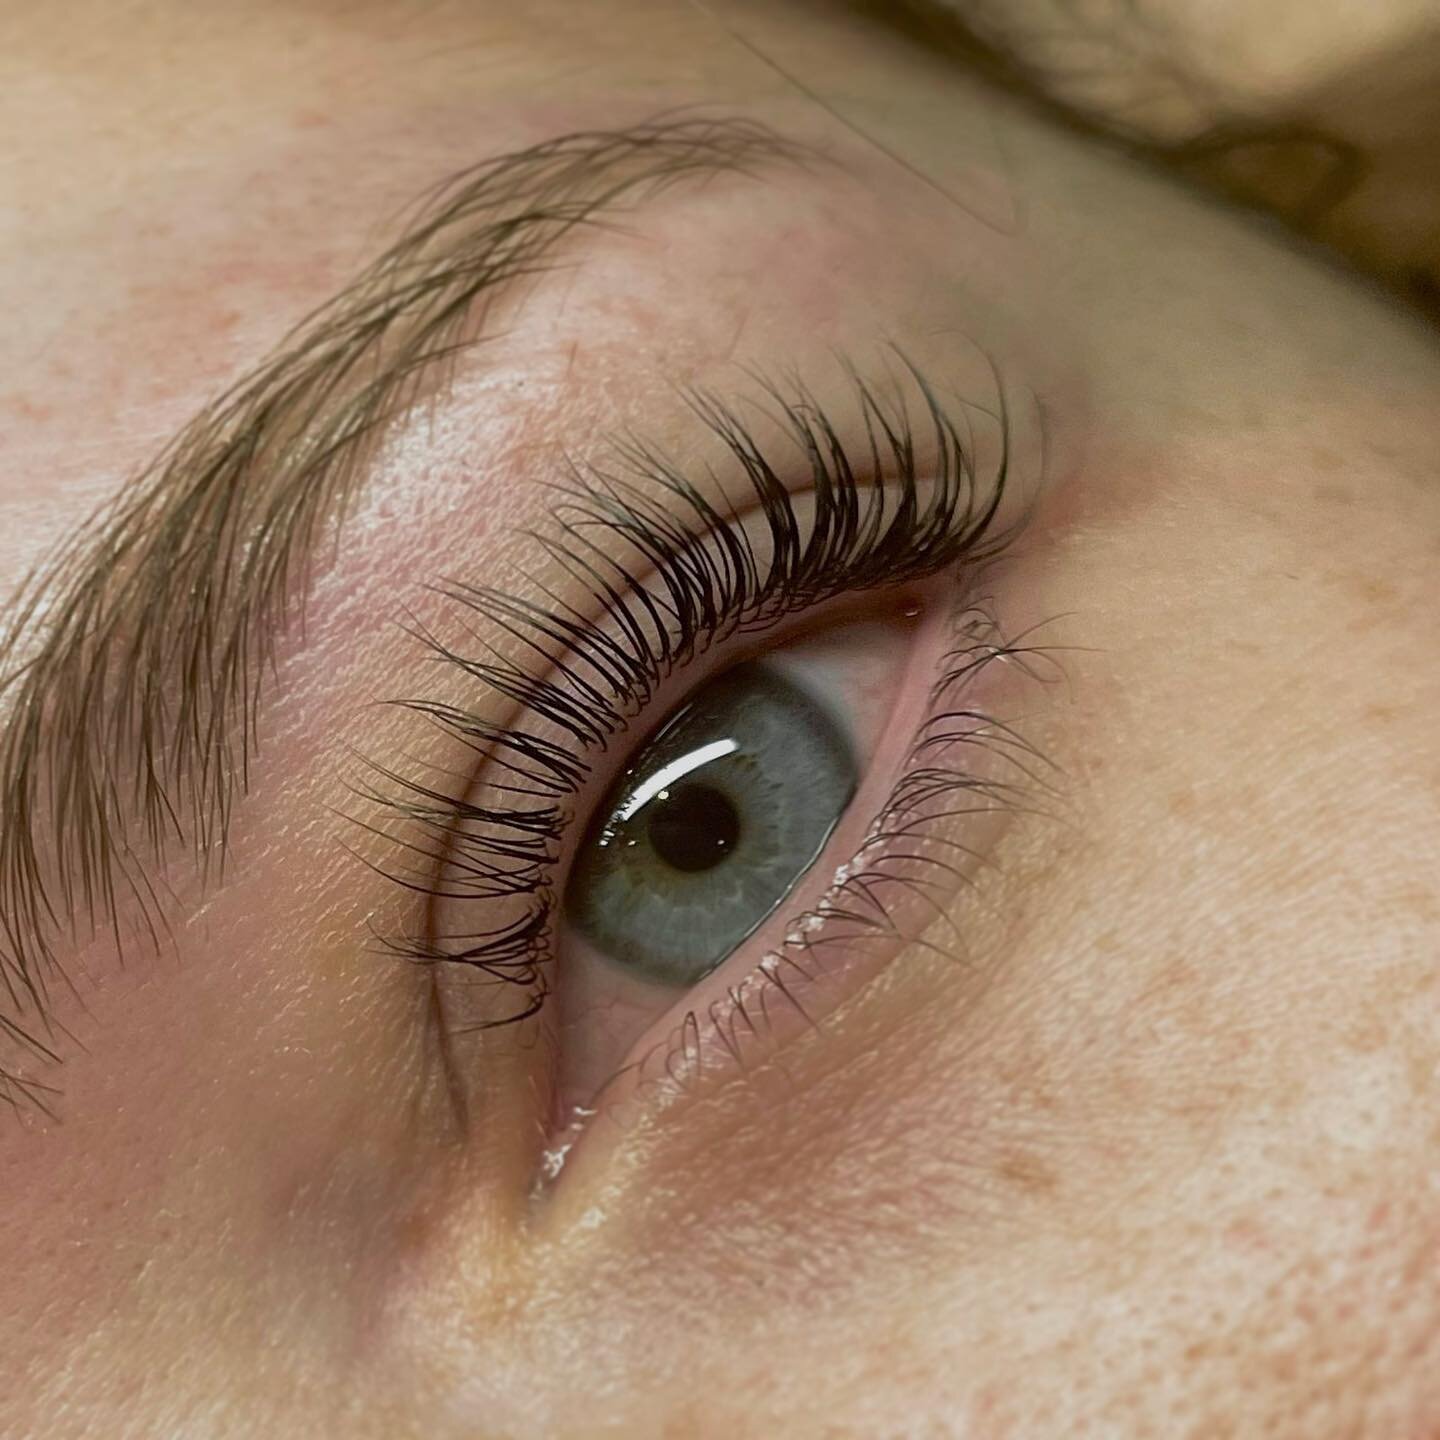 A lash lift &amp; tint is the perfect alternative to mascara, adding length, curl and definition to your natural eyelashes for 6-8 weeks.🤍 
By Amy. 

#novuharrogate #harrogatesalon #harrogatelvl #harrogatelashlift #harrogatebusiness #harrogatelashes